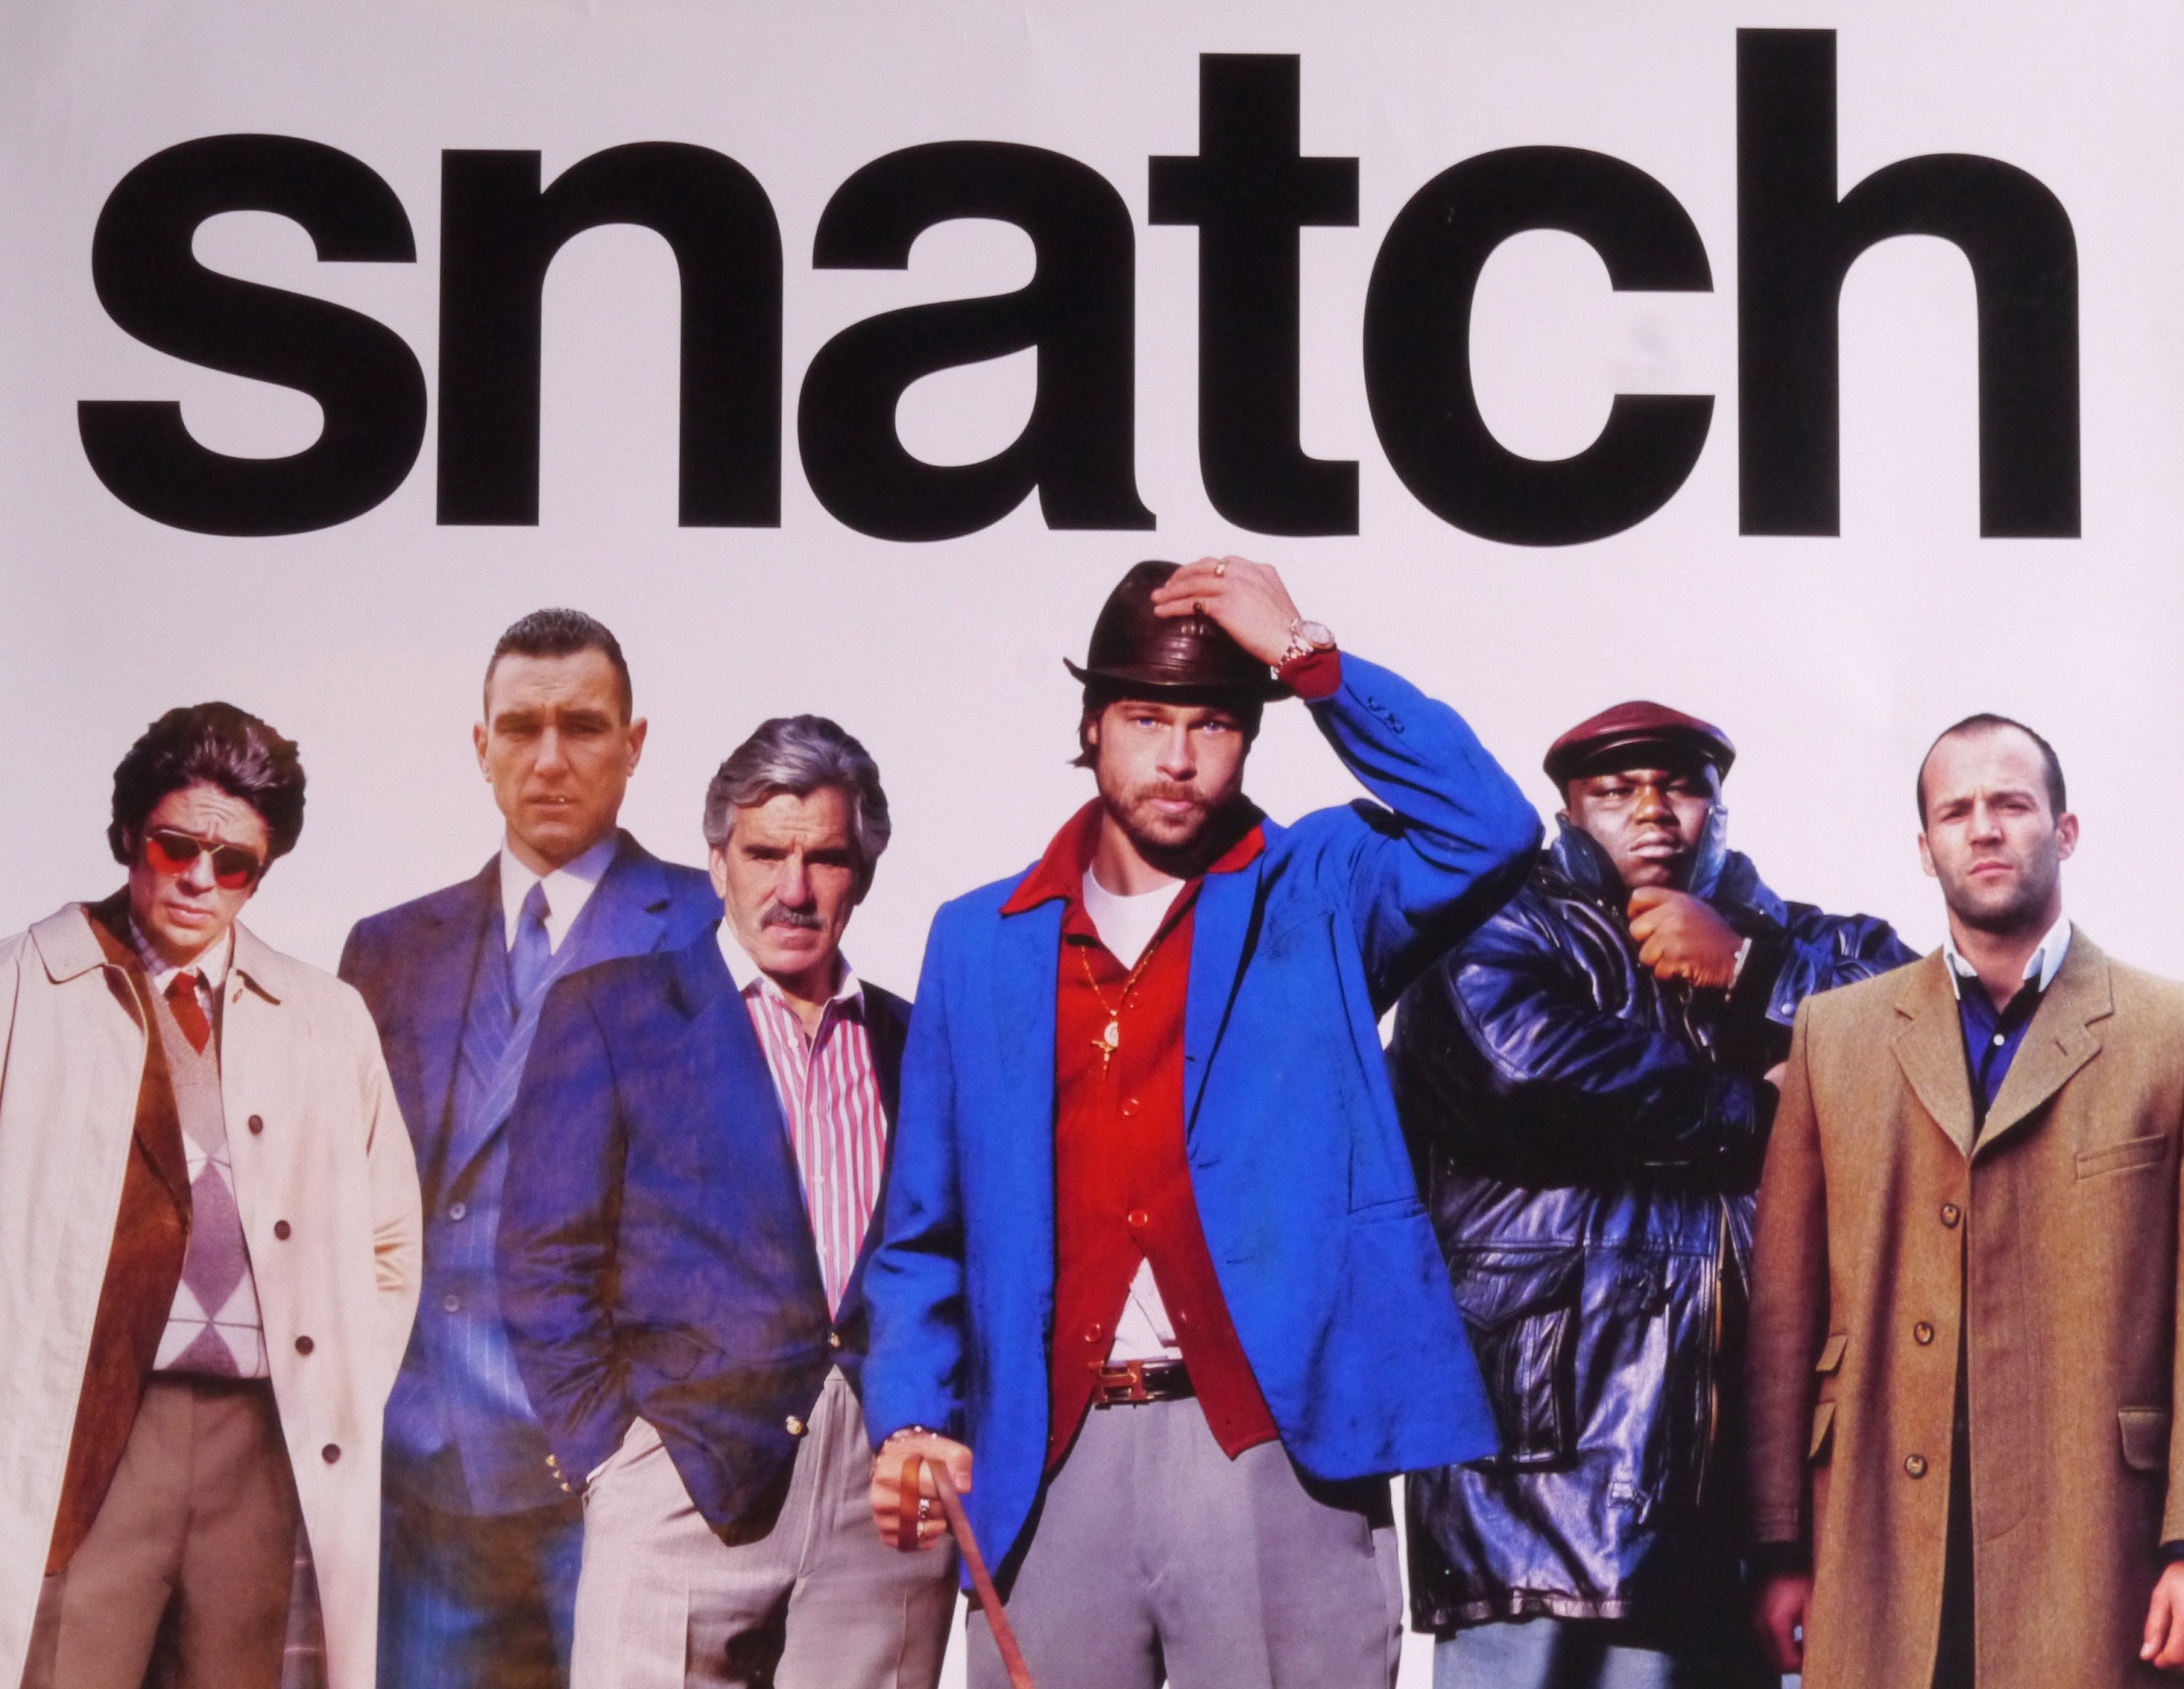 Snatch-original Vintage Movie Poster of Guy Ritchies